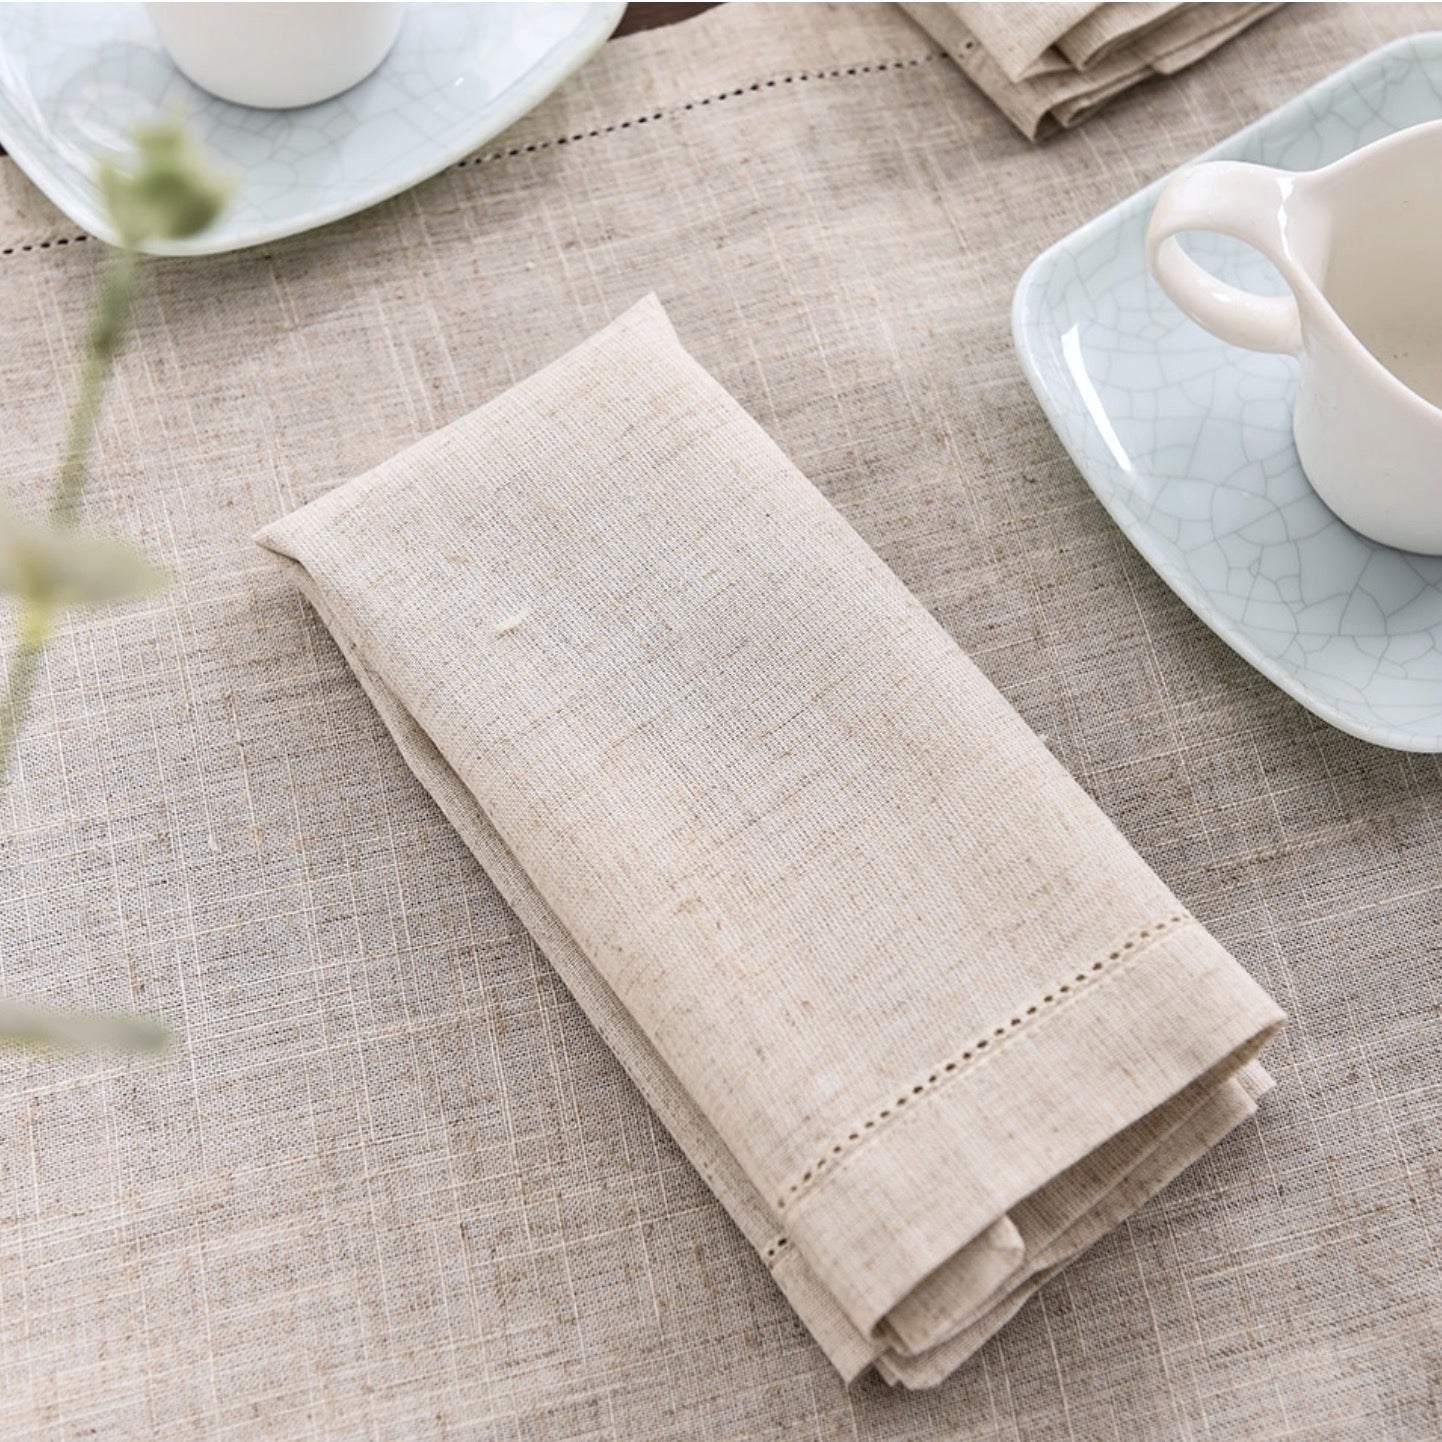 Santorini Table Accessories Collection Napkin Rings, Napkins & Placemats